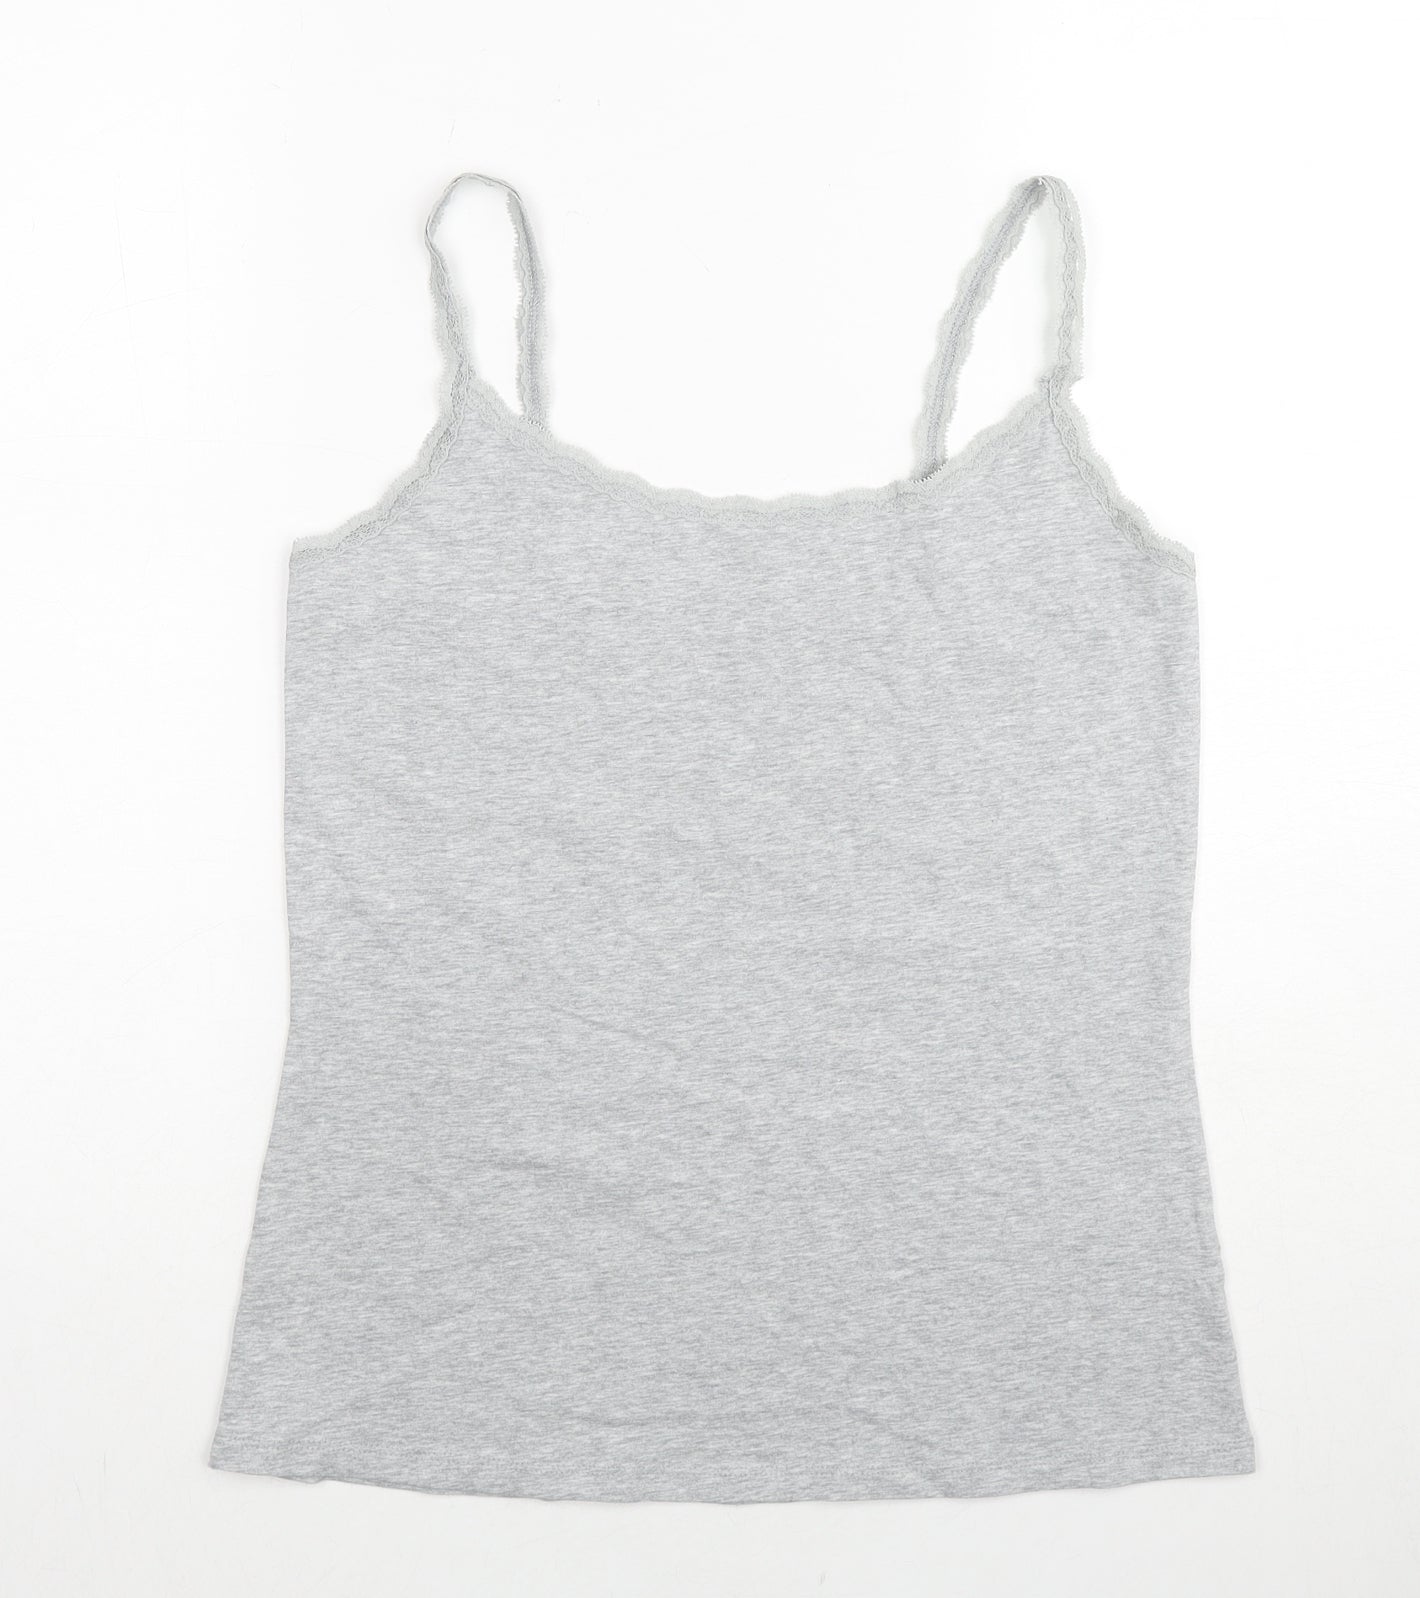 Marks and Spencer Womens Grey Cotton Camisole Tank Size 14 Round Neck - Lace Trim